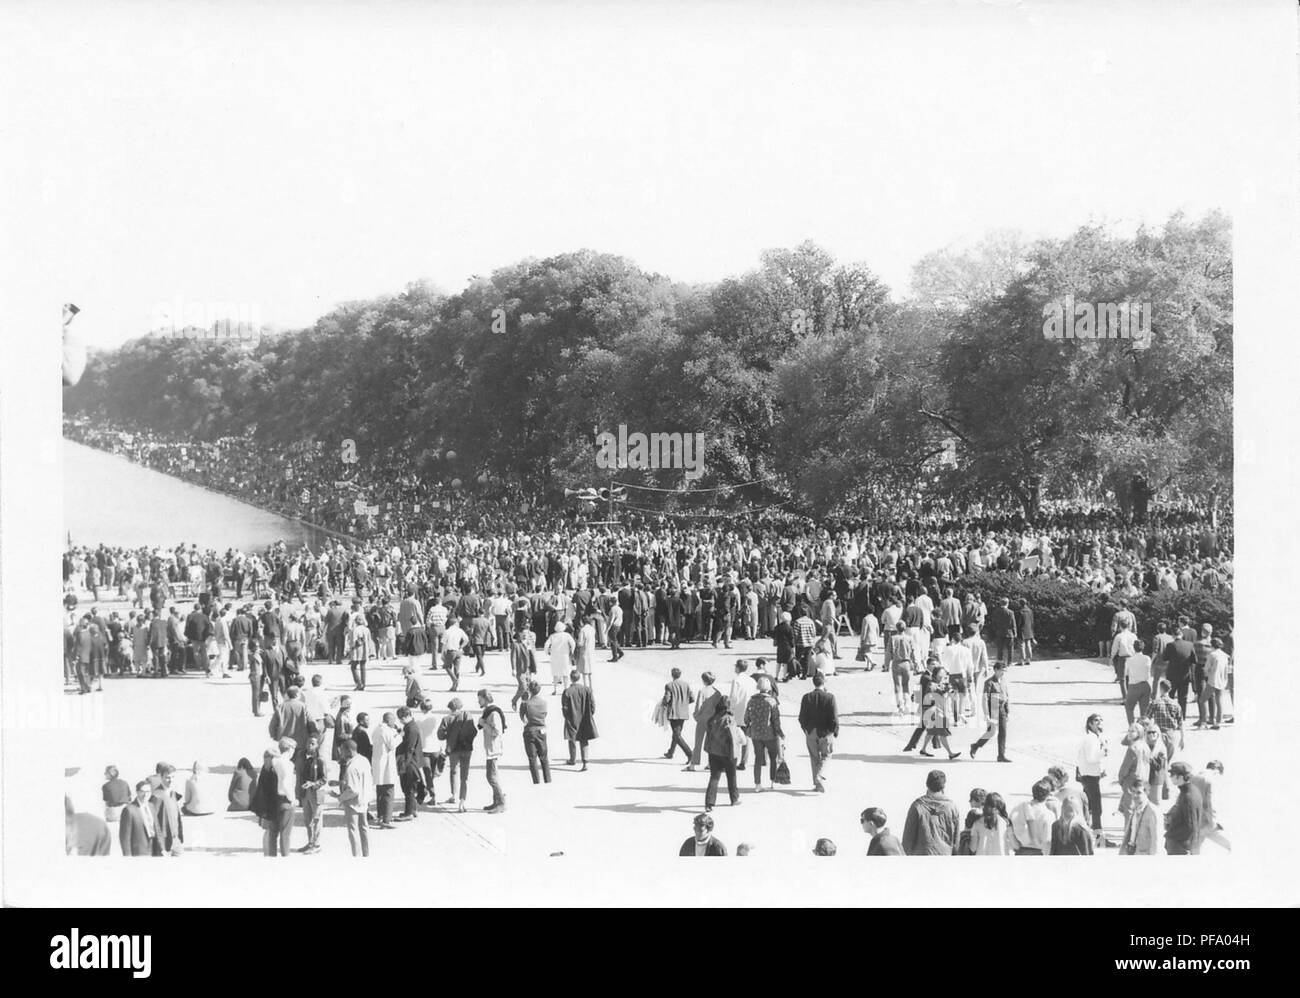 Black and white photograph, showing a crowd of people standing and walking on a paved area of the National Mall surrounding the Lincoln Memorial Reflecting Pool, during a march to protest the Vietnam War, photographed in Washington DC, United States, 1969. () Stock Photo